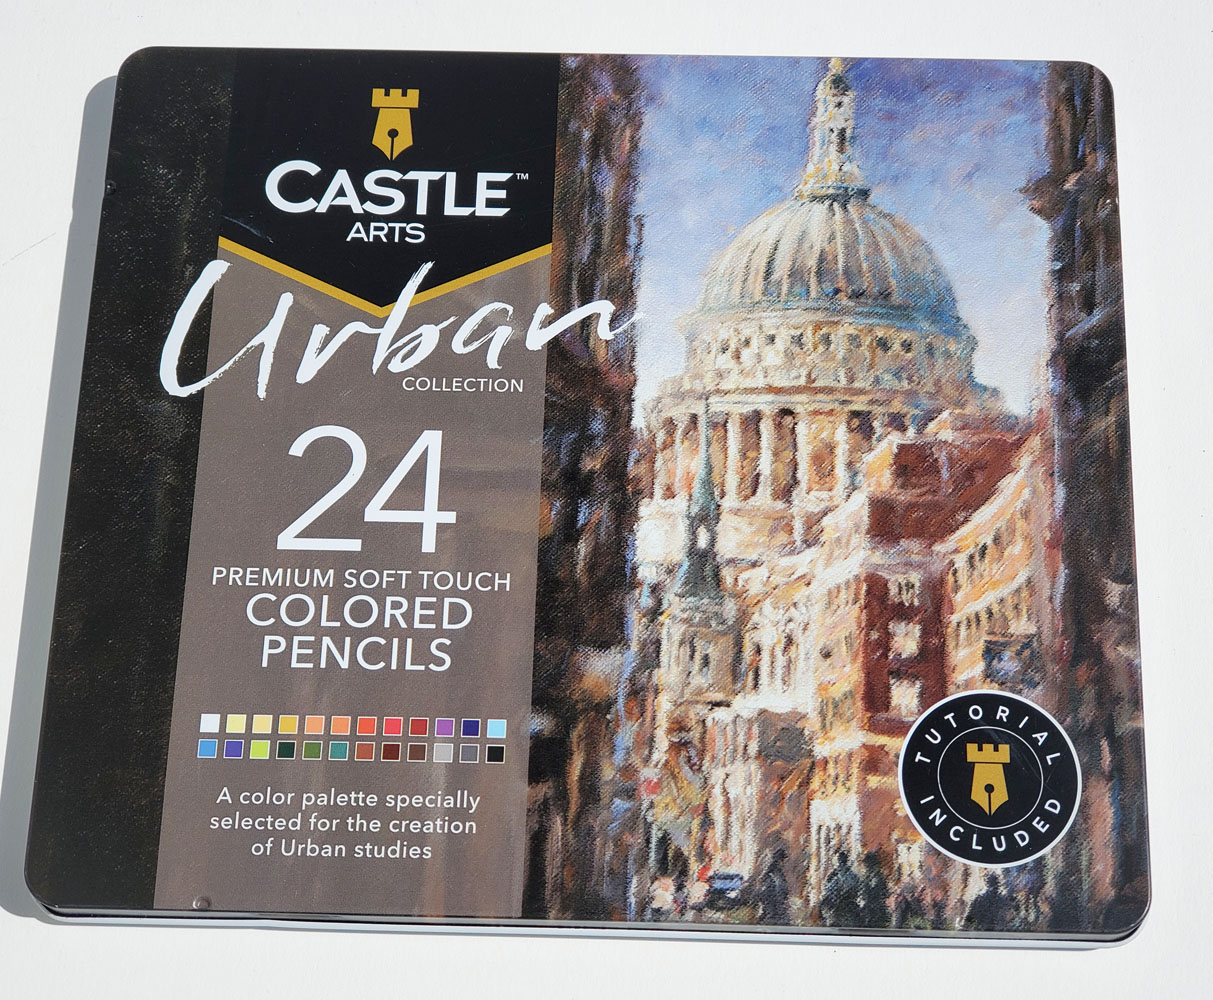 Castle Arts Themed 24 Colored Pencil Set in Tin Box, perfect colors for  'Botanical' Art. Featuring quality, smooth colored cores, superior blending  & layering performance for great results